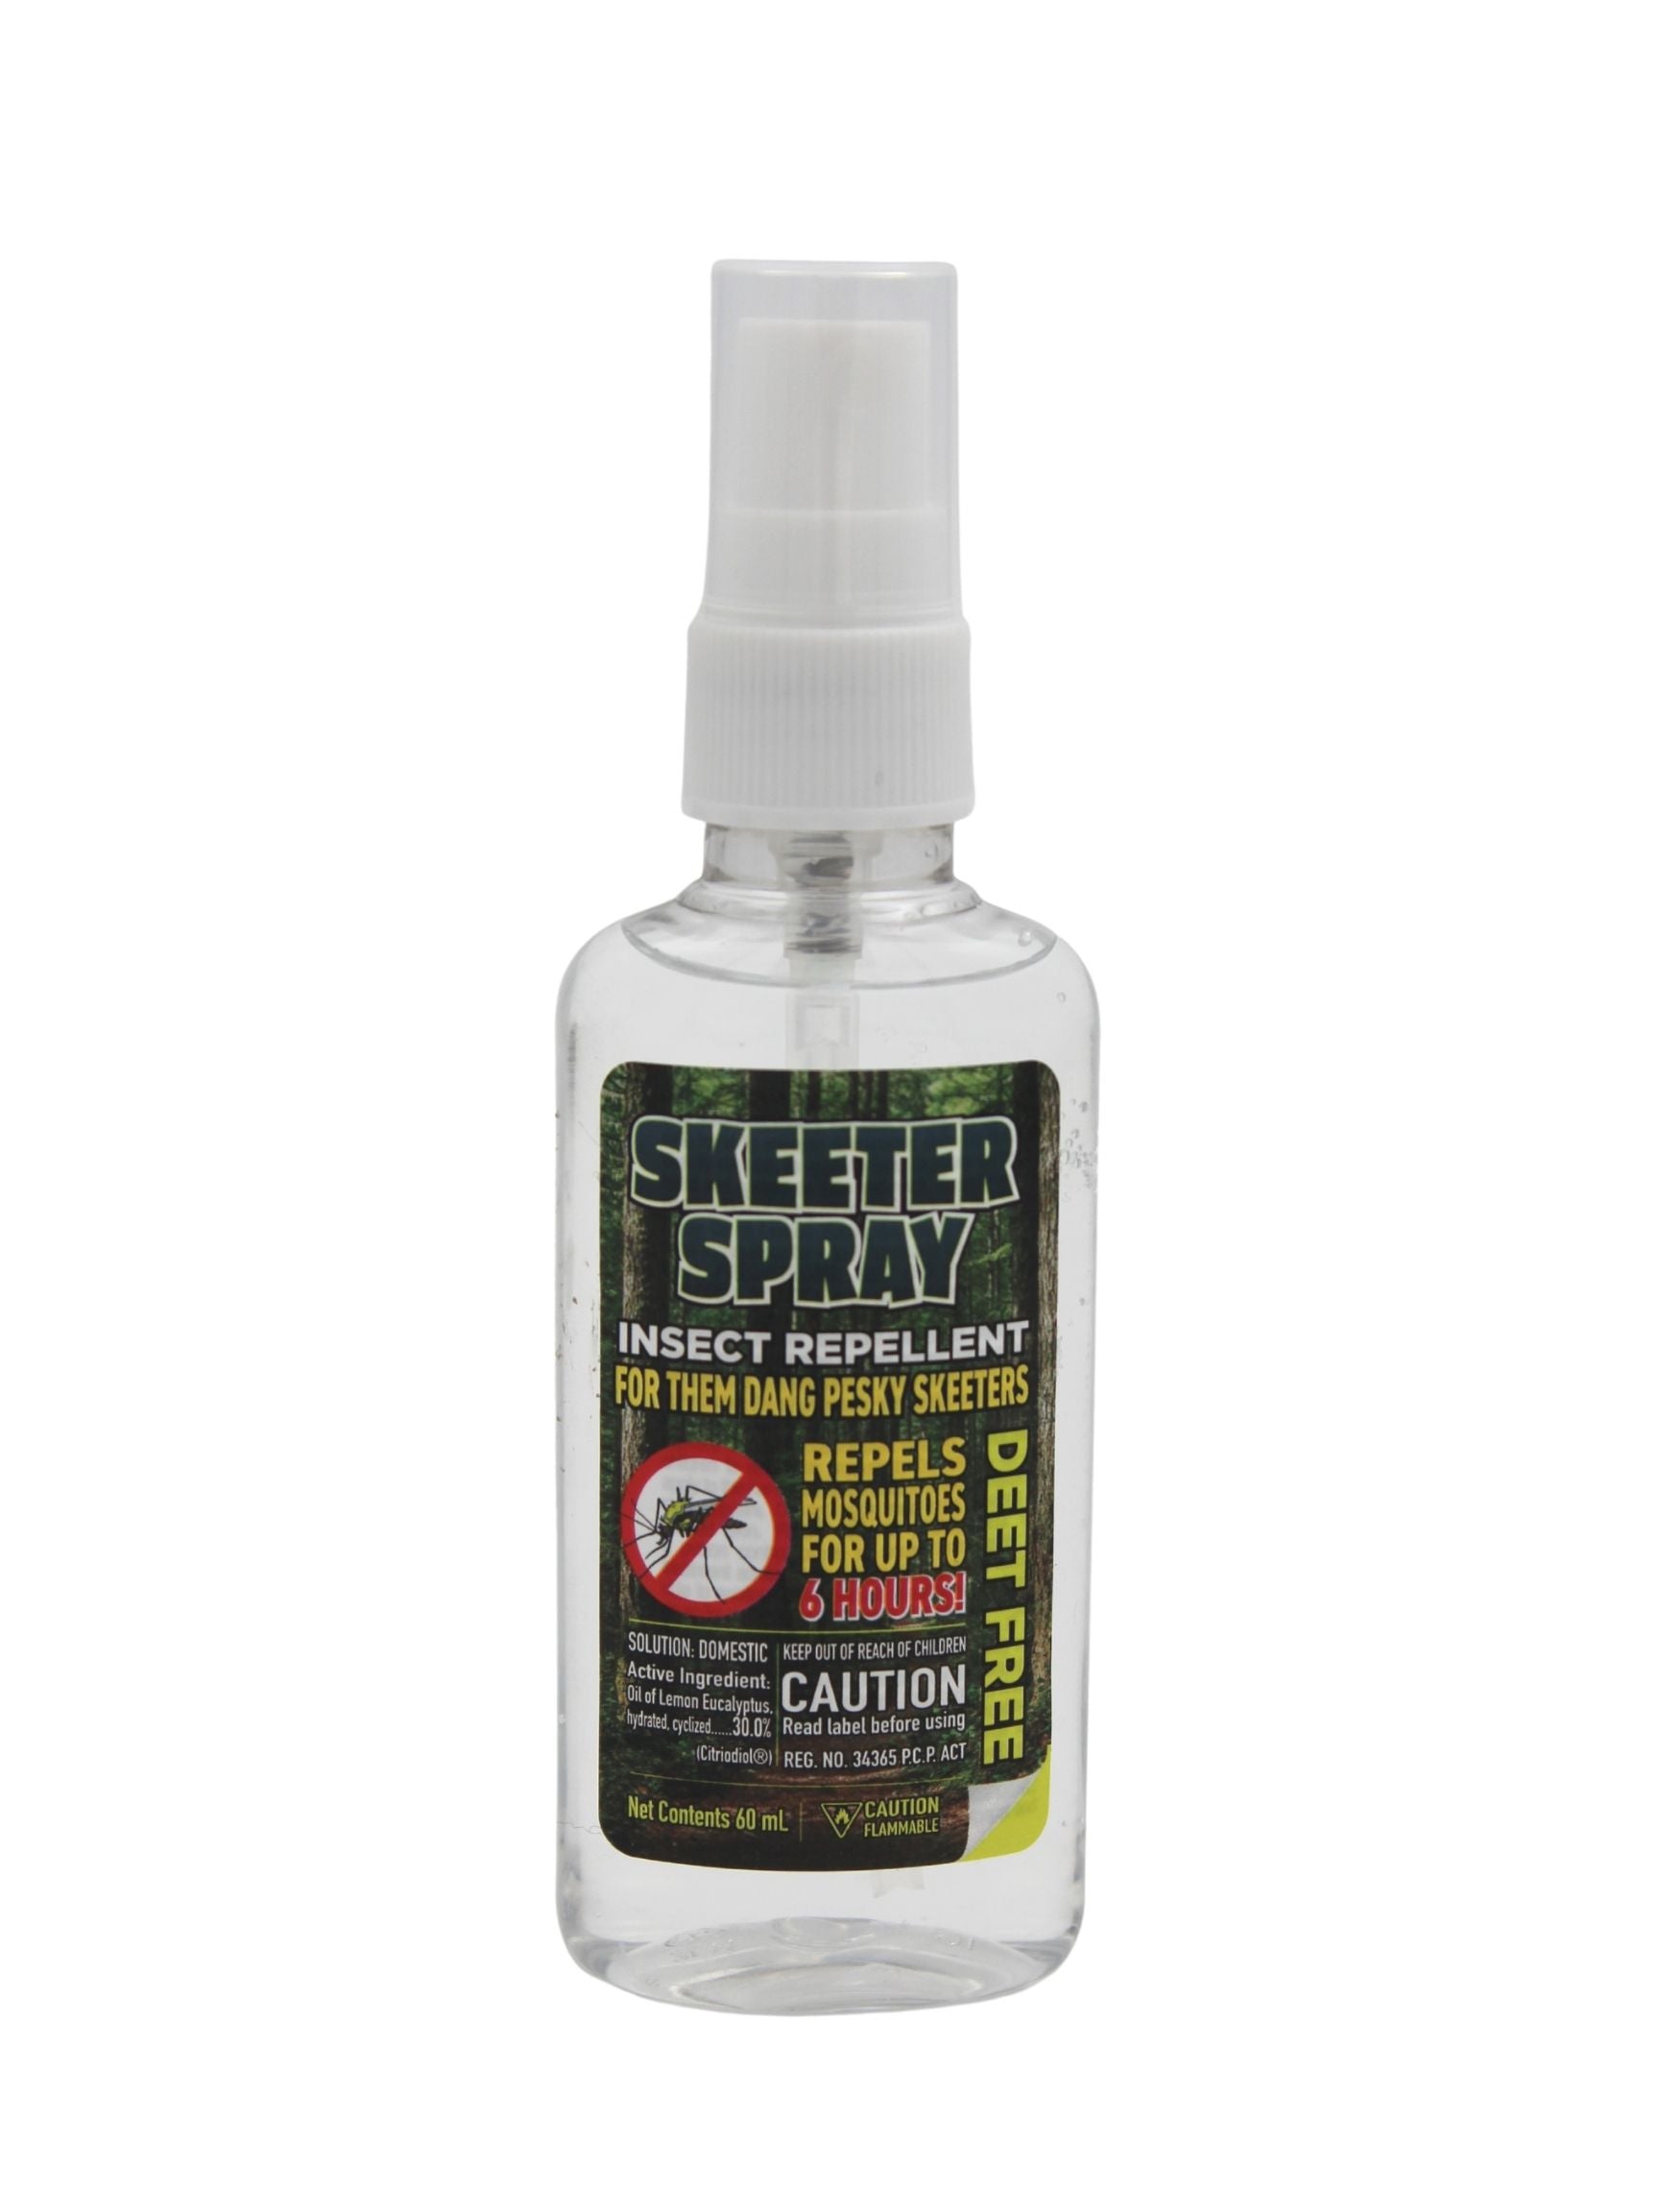 60mL Skeeter Spray Insect Repellent – All Clean Natural